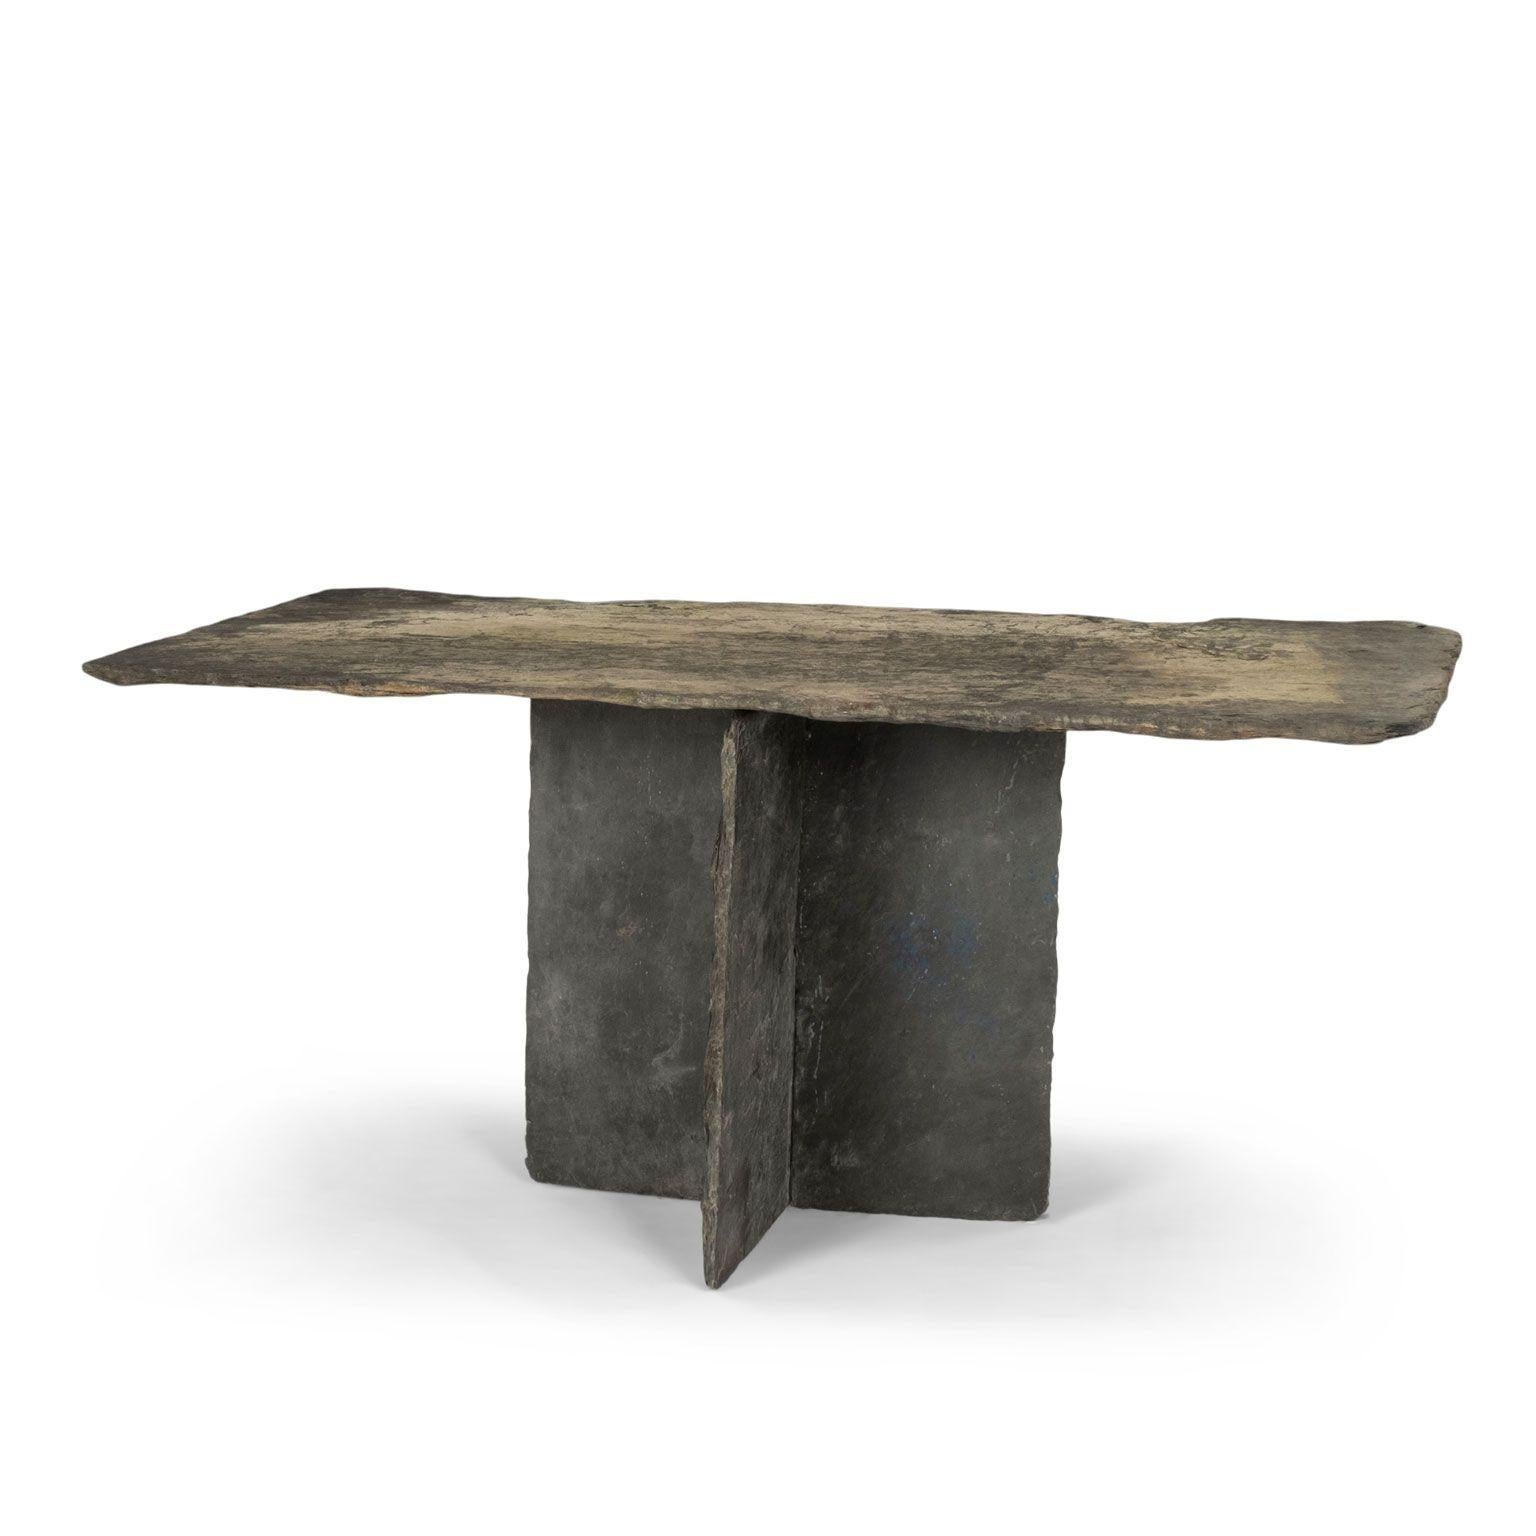 Vintage French rectangular-top slate low console table, raised upon two-piece straight-edge slate base. Lichen and patina from outdoor use covered one side of top (both sides shown in images). Patina and lichen can be removed and slate given a